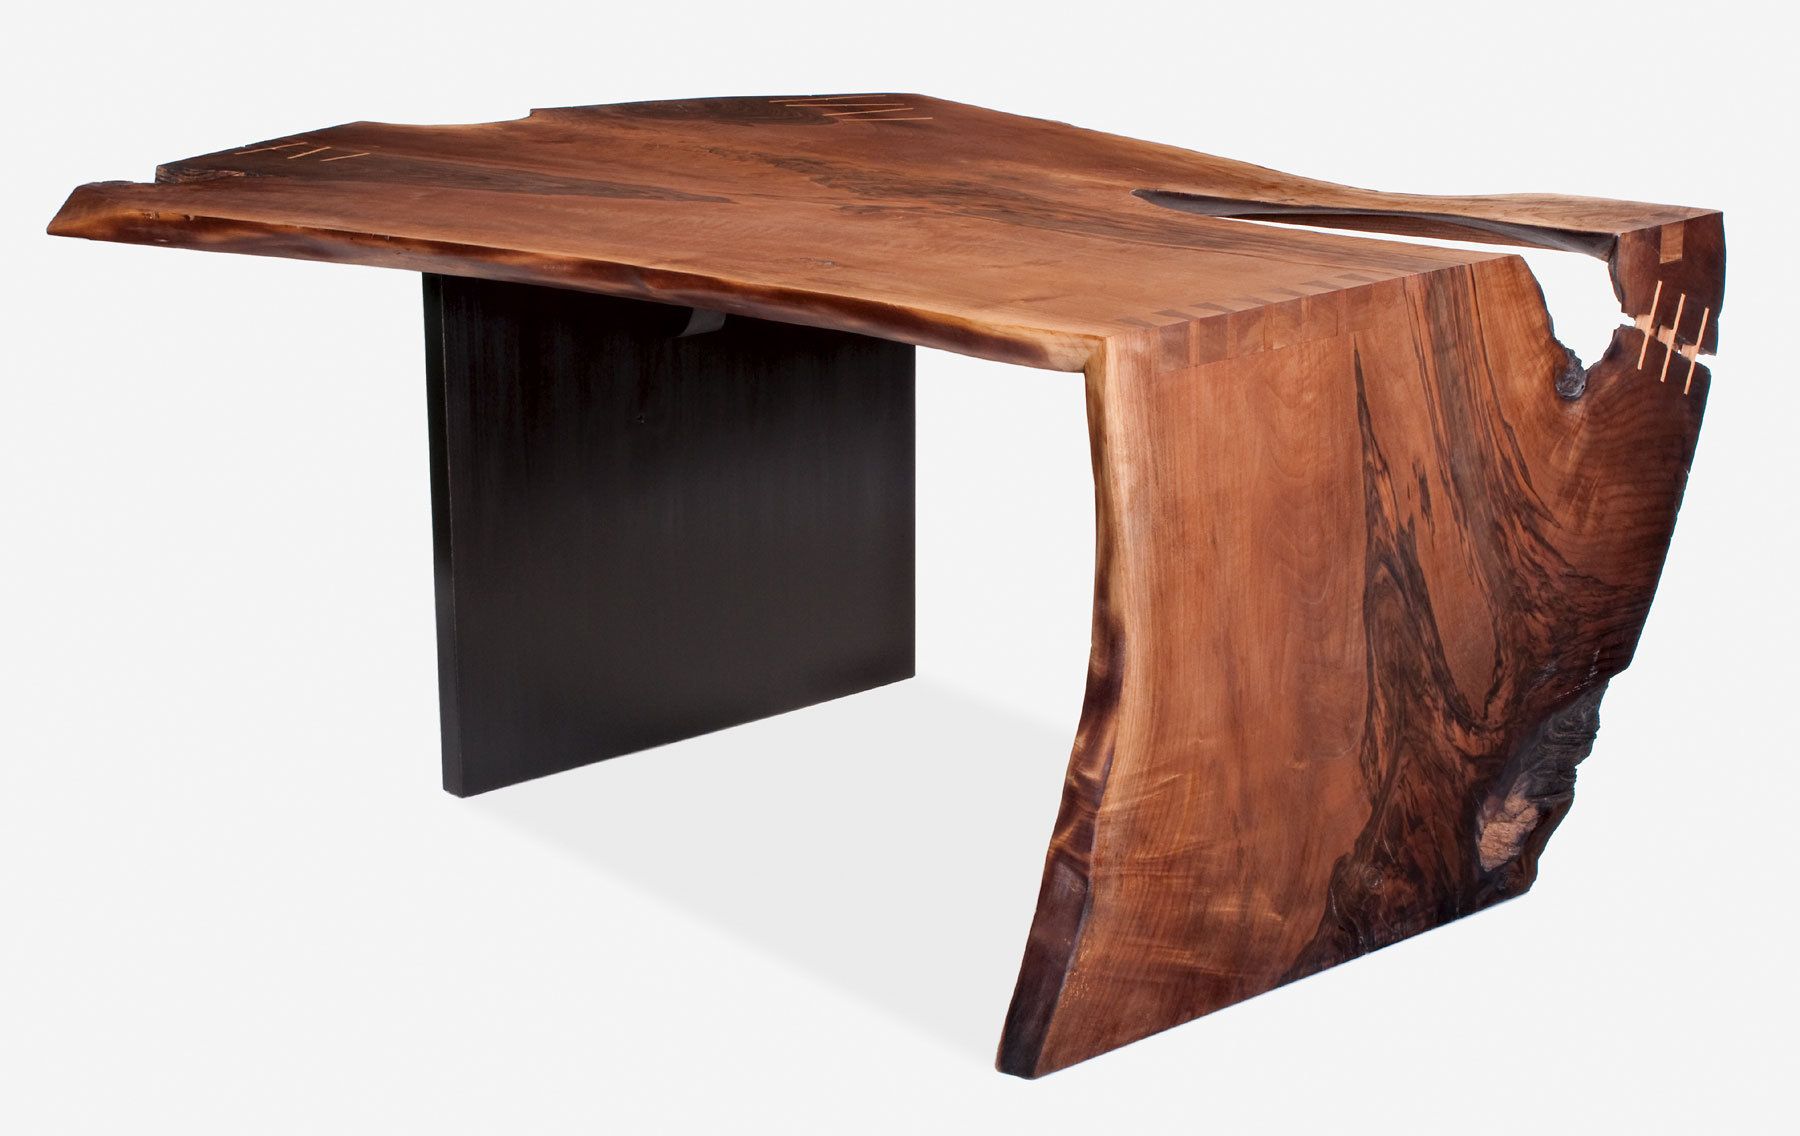 Wedge table